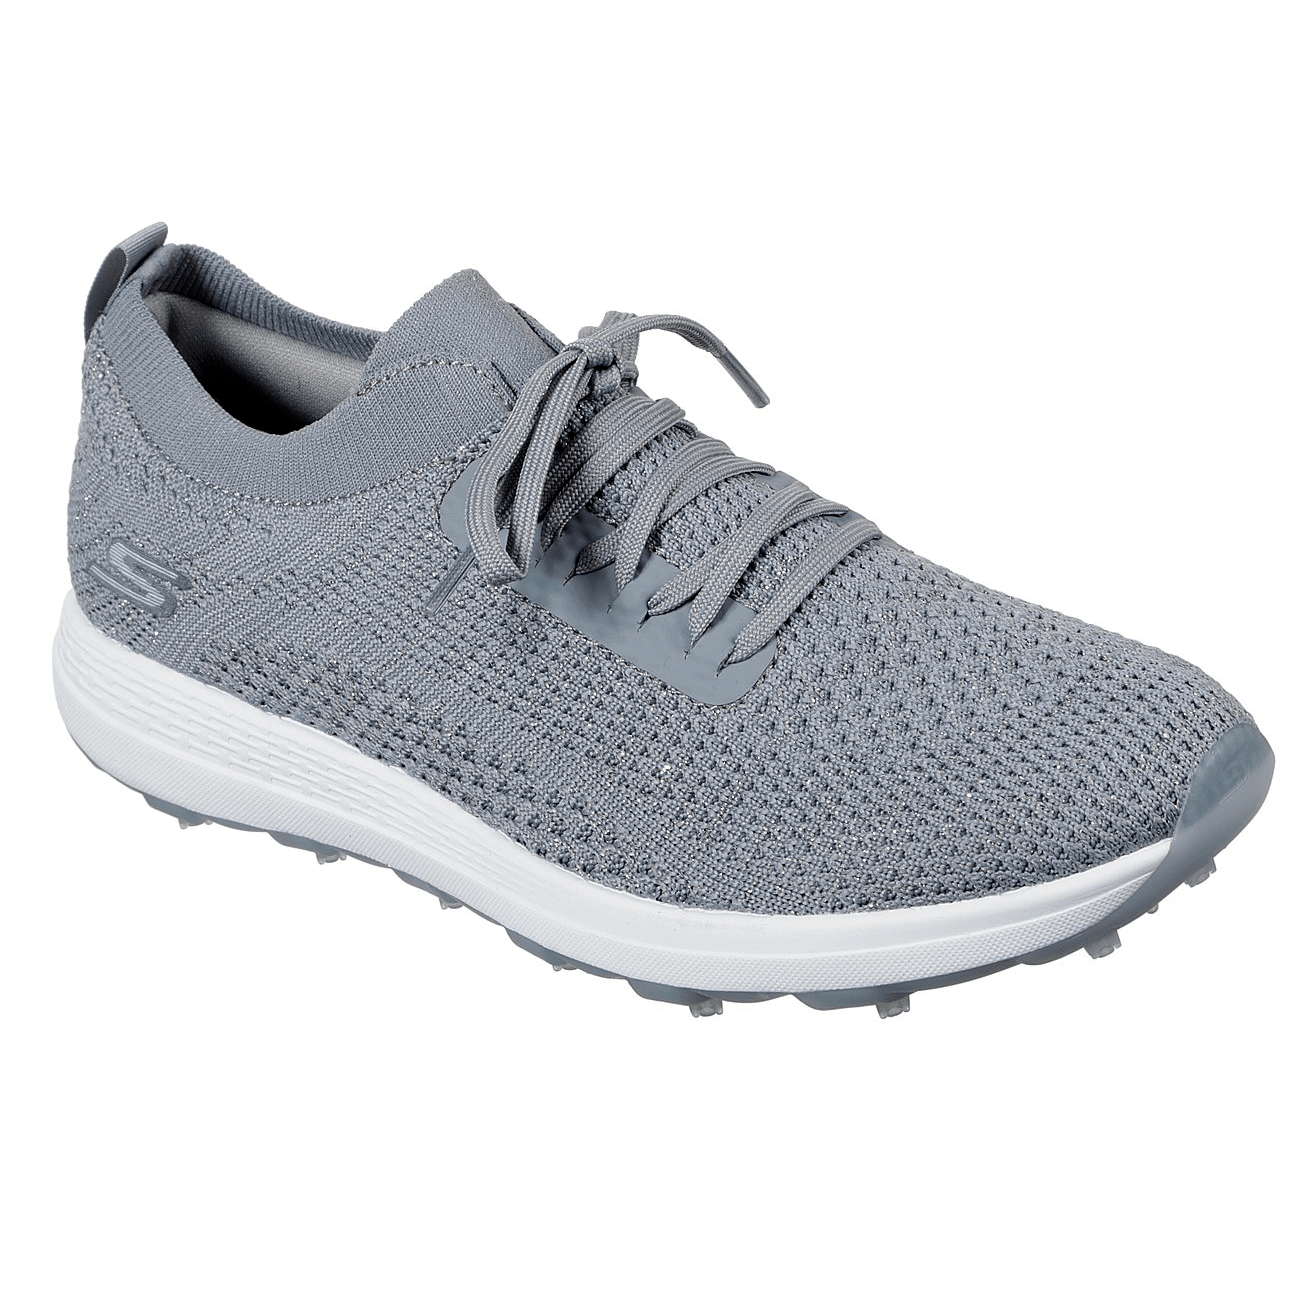 skechers golf shoes stockists